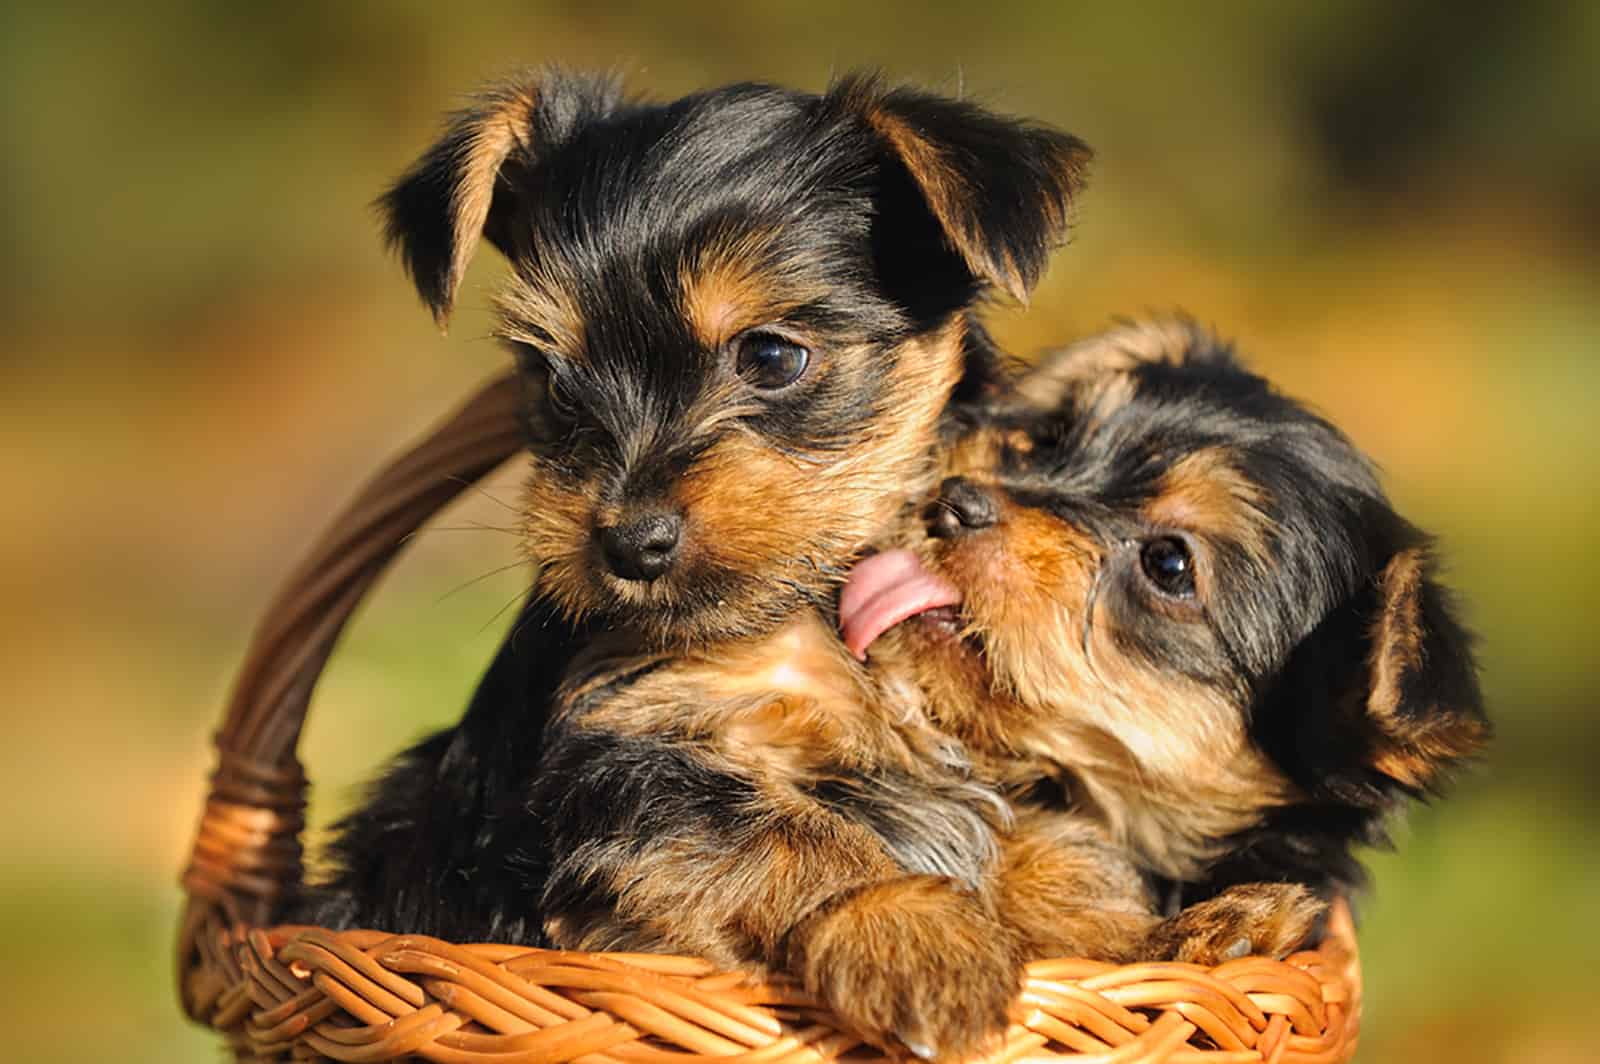 two yorkshire terrier puppies in the basket